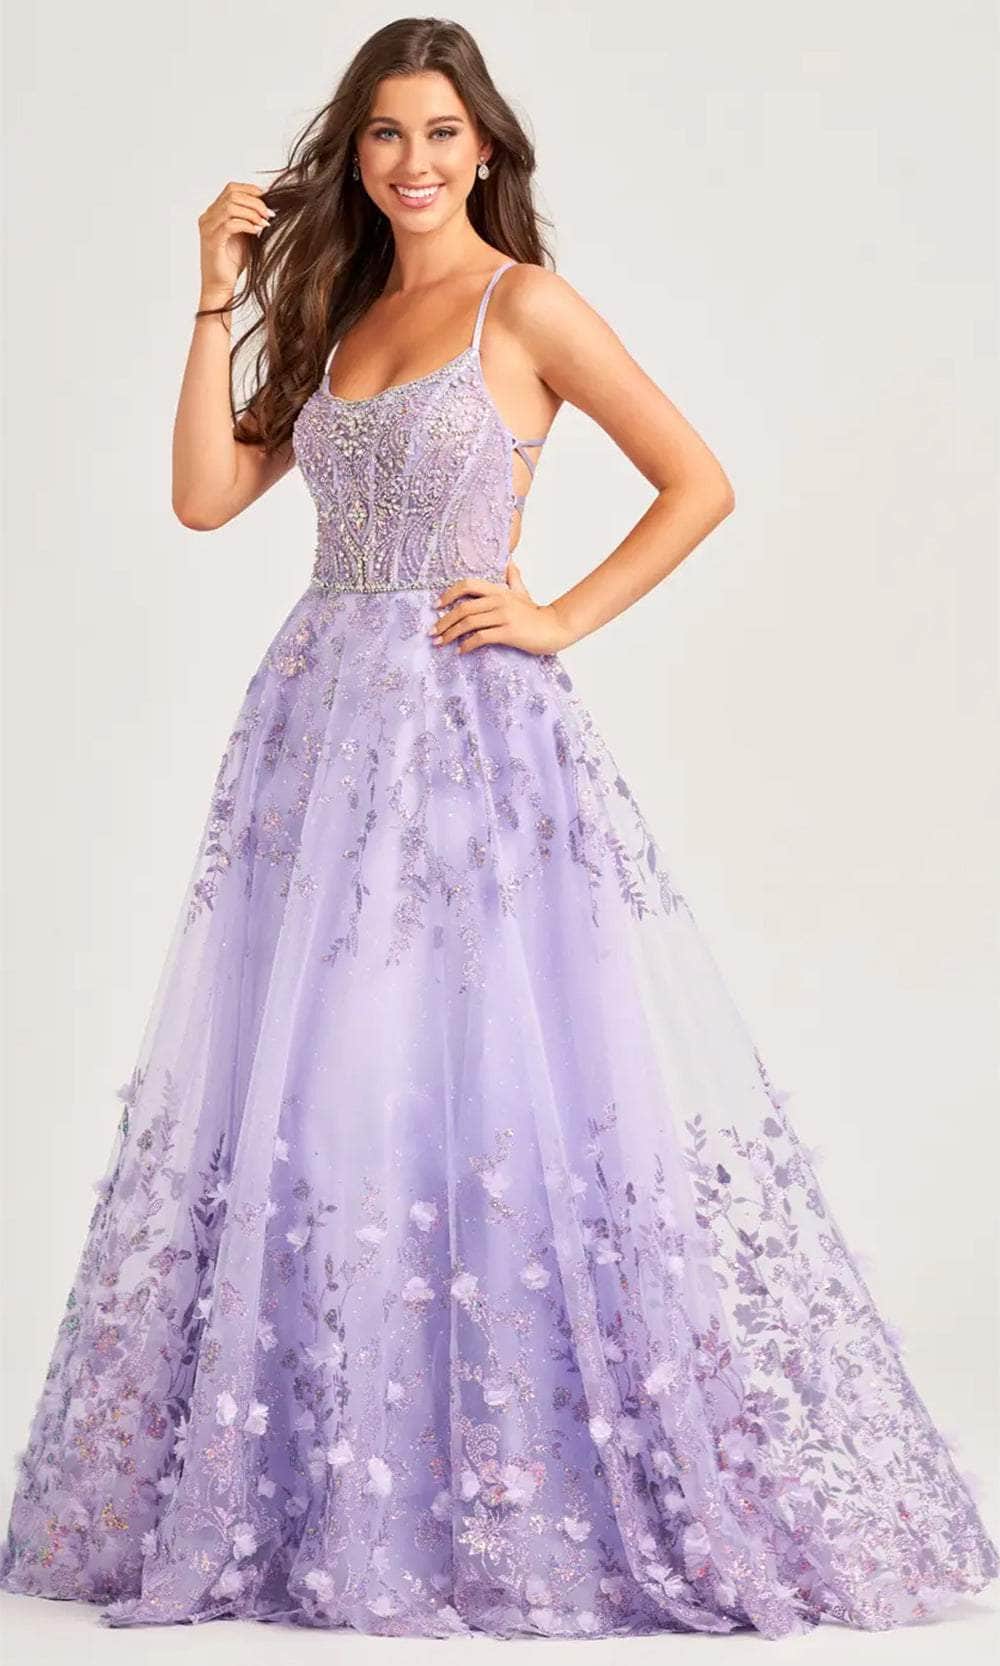 Ellie Wilde EW35240 - Scoop Neck Lace-Up Back Prom Gown
